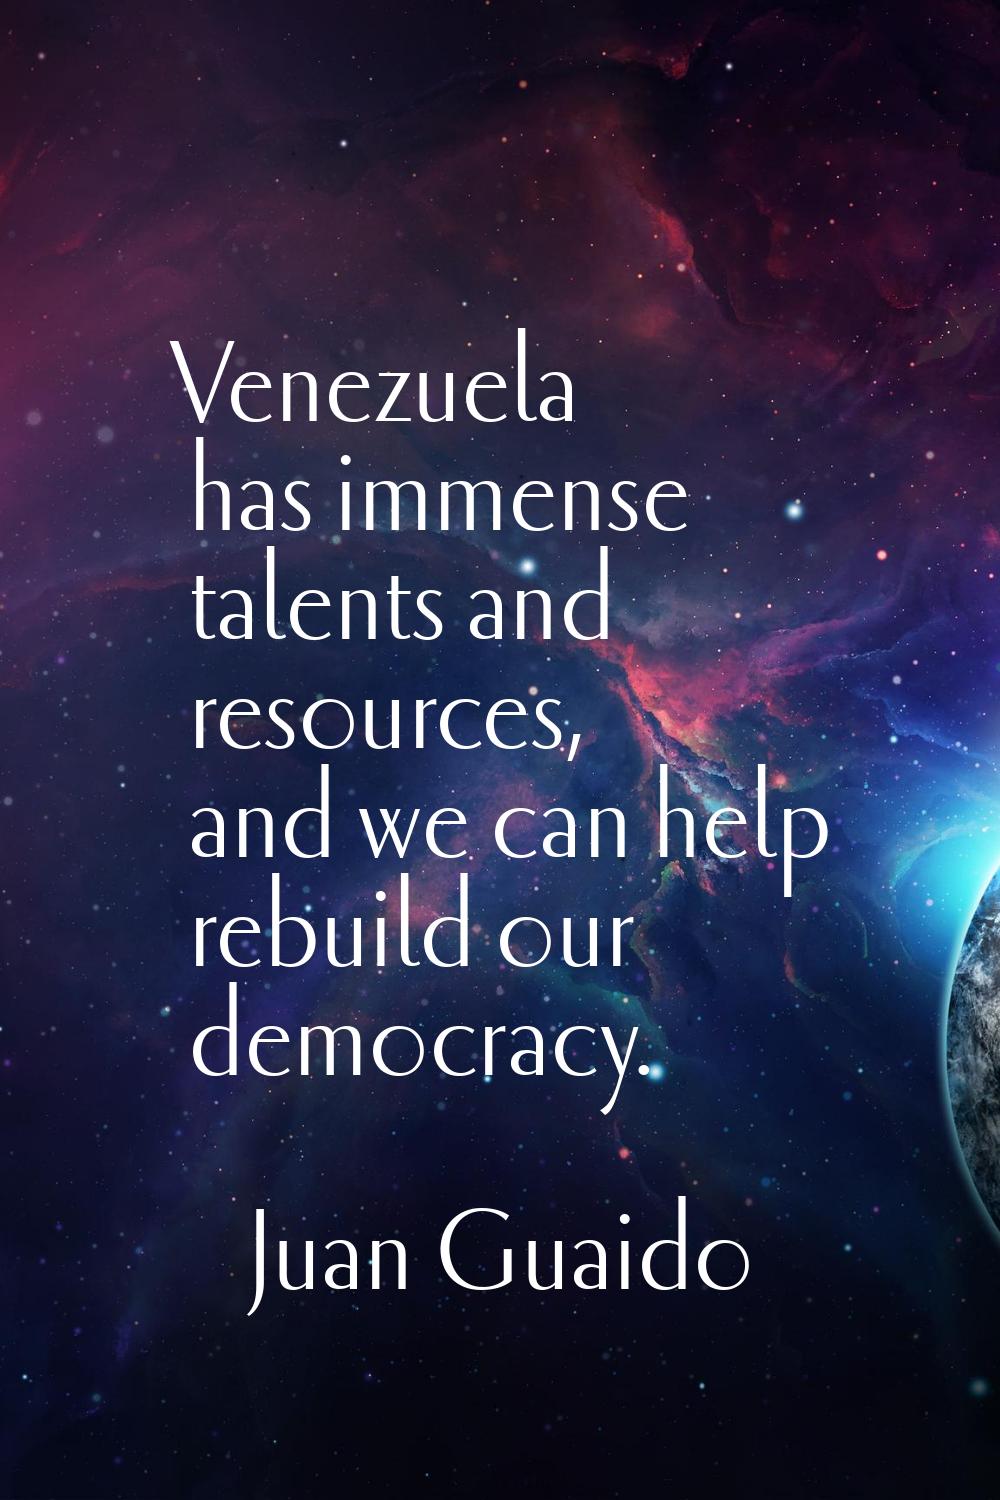 Venezuela has immense talents and resources, and we can help rebuild our democracy.